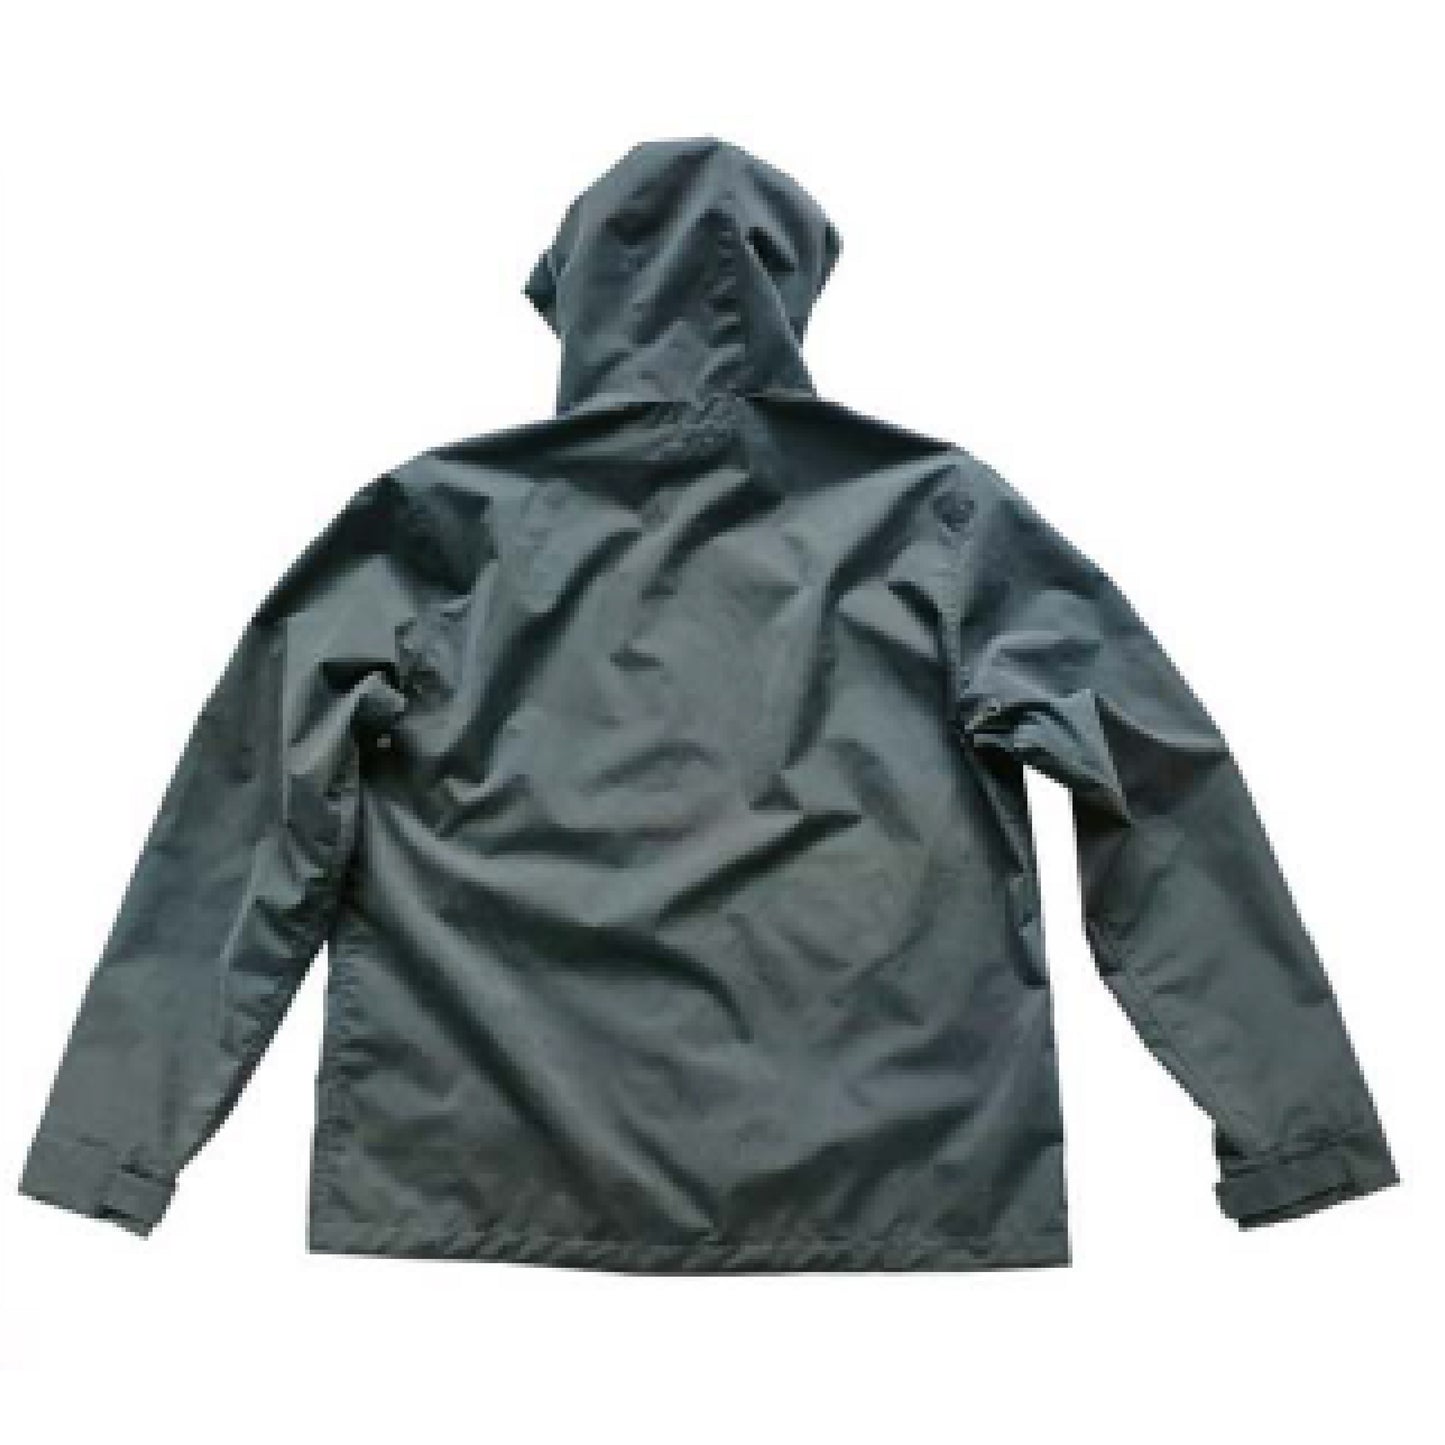 Google - Union of Forces ® Coat by Athletic Forces -  Model 1